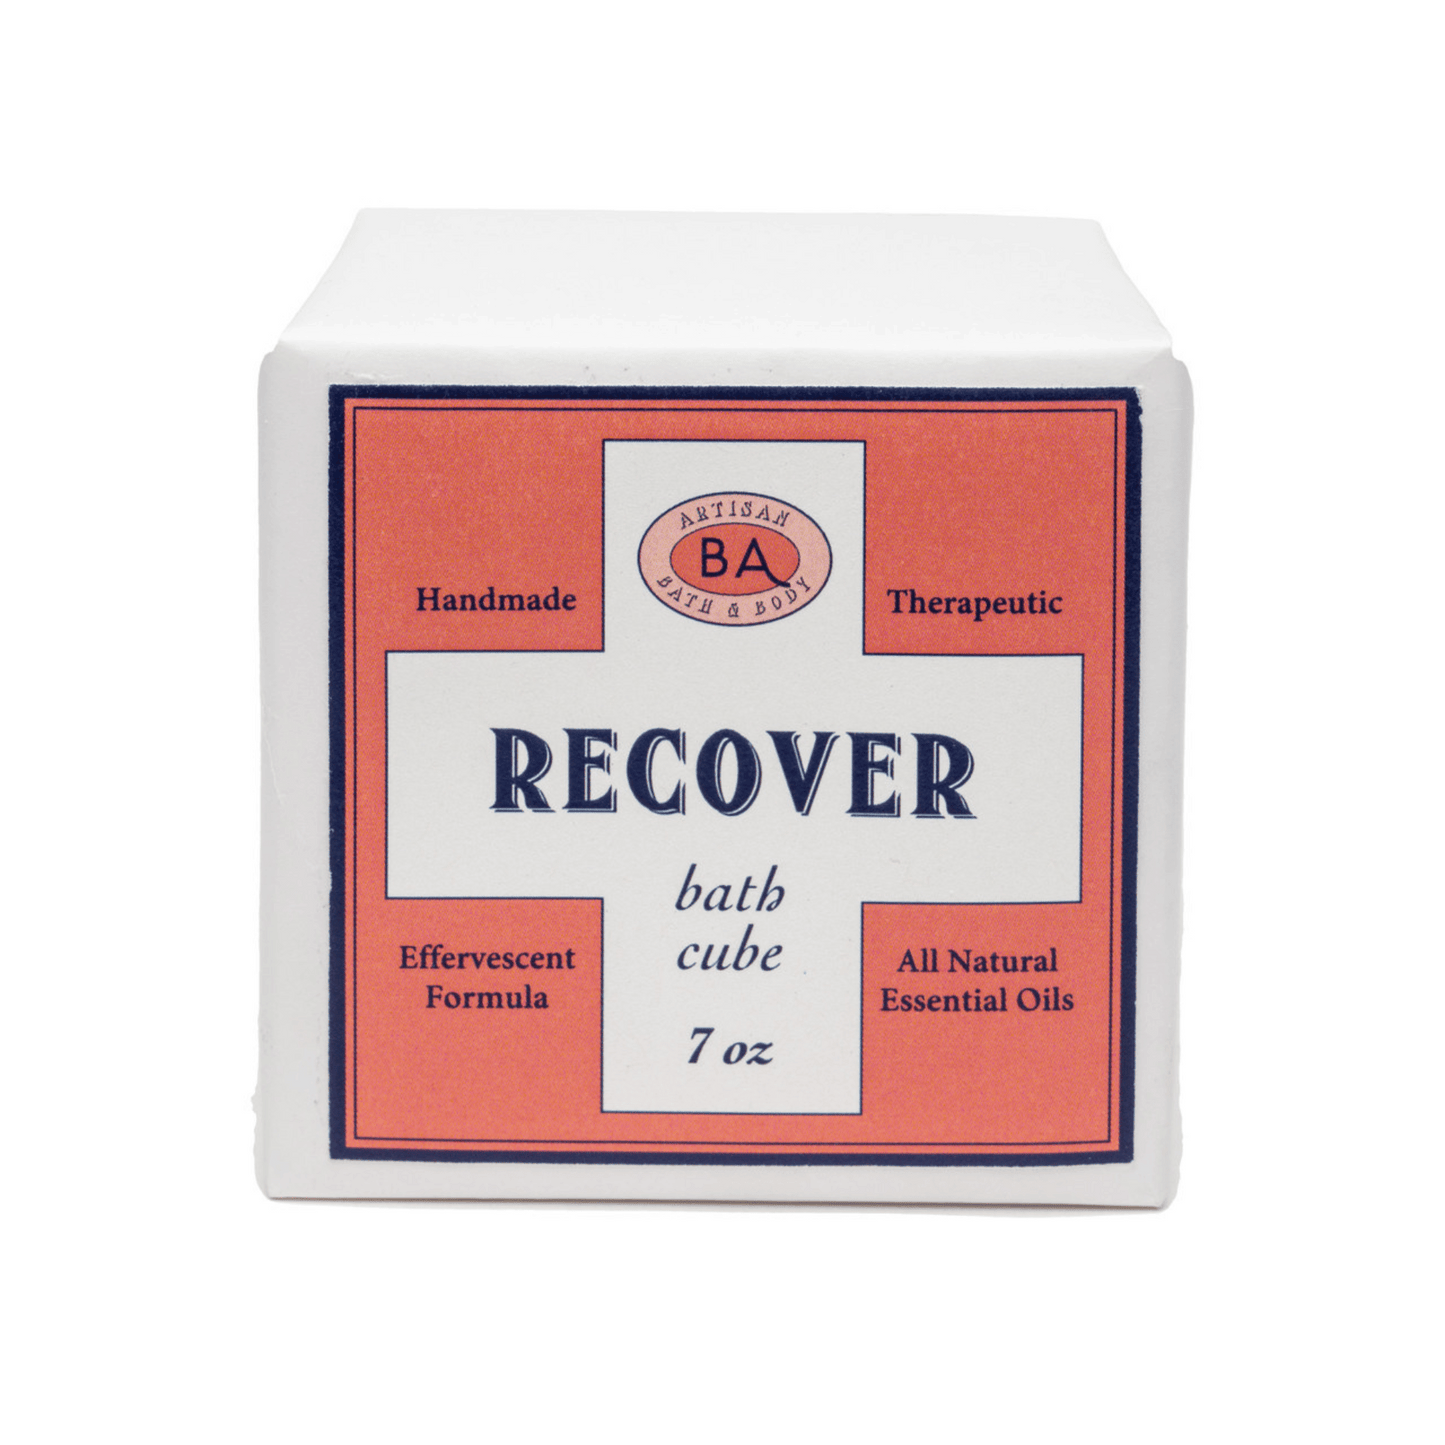 Primary Image of Recover Bath Cube